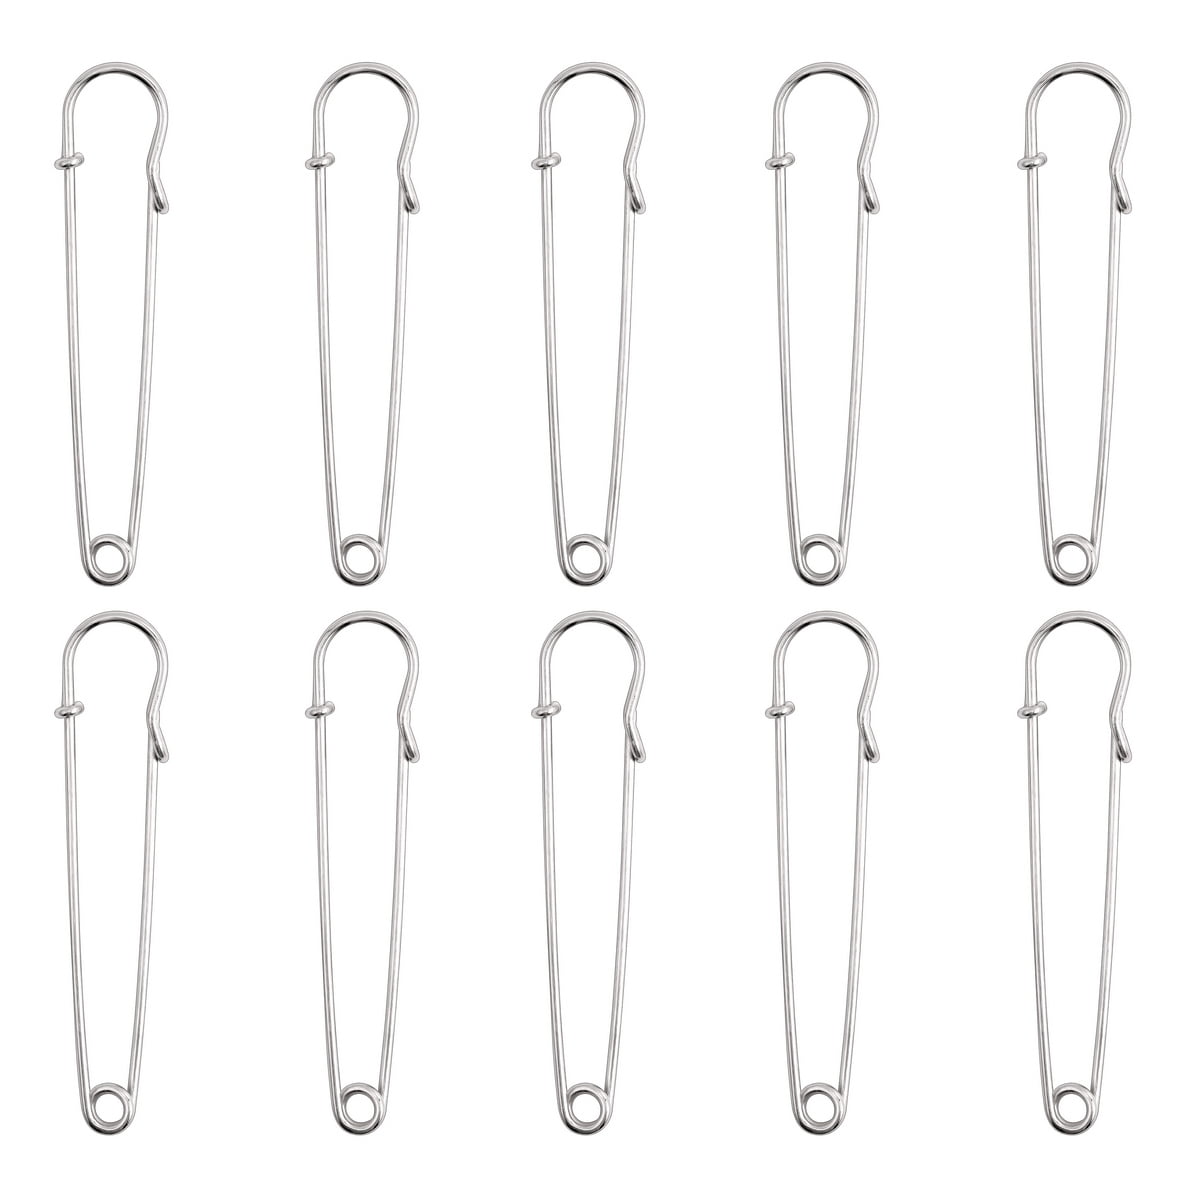 Black Brass & Steel Pins - Wholesale Prices on Safety Pins by Strang Advance